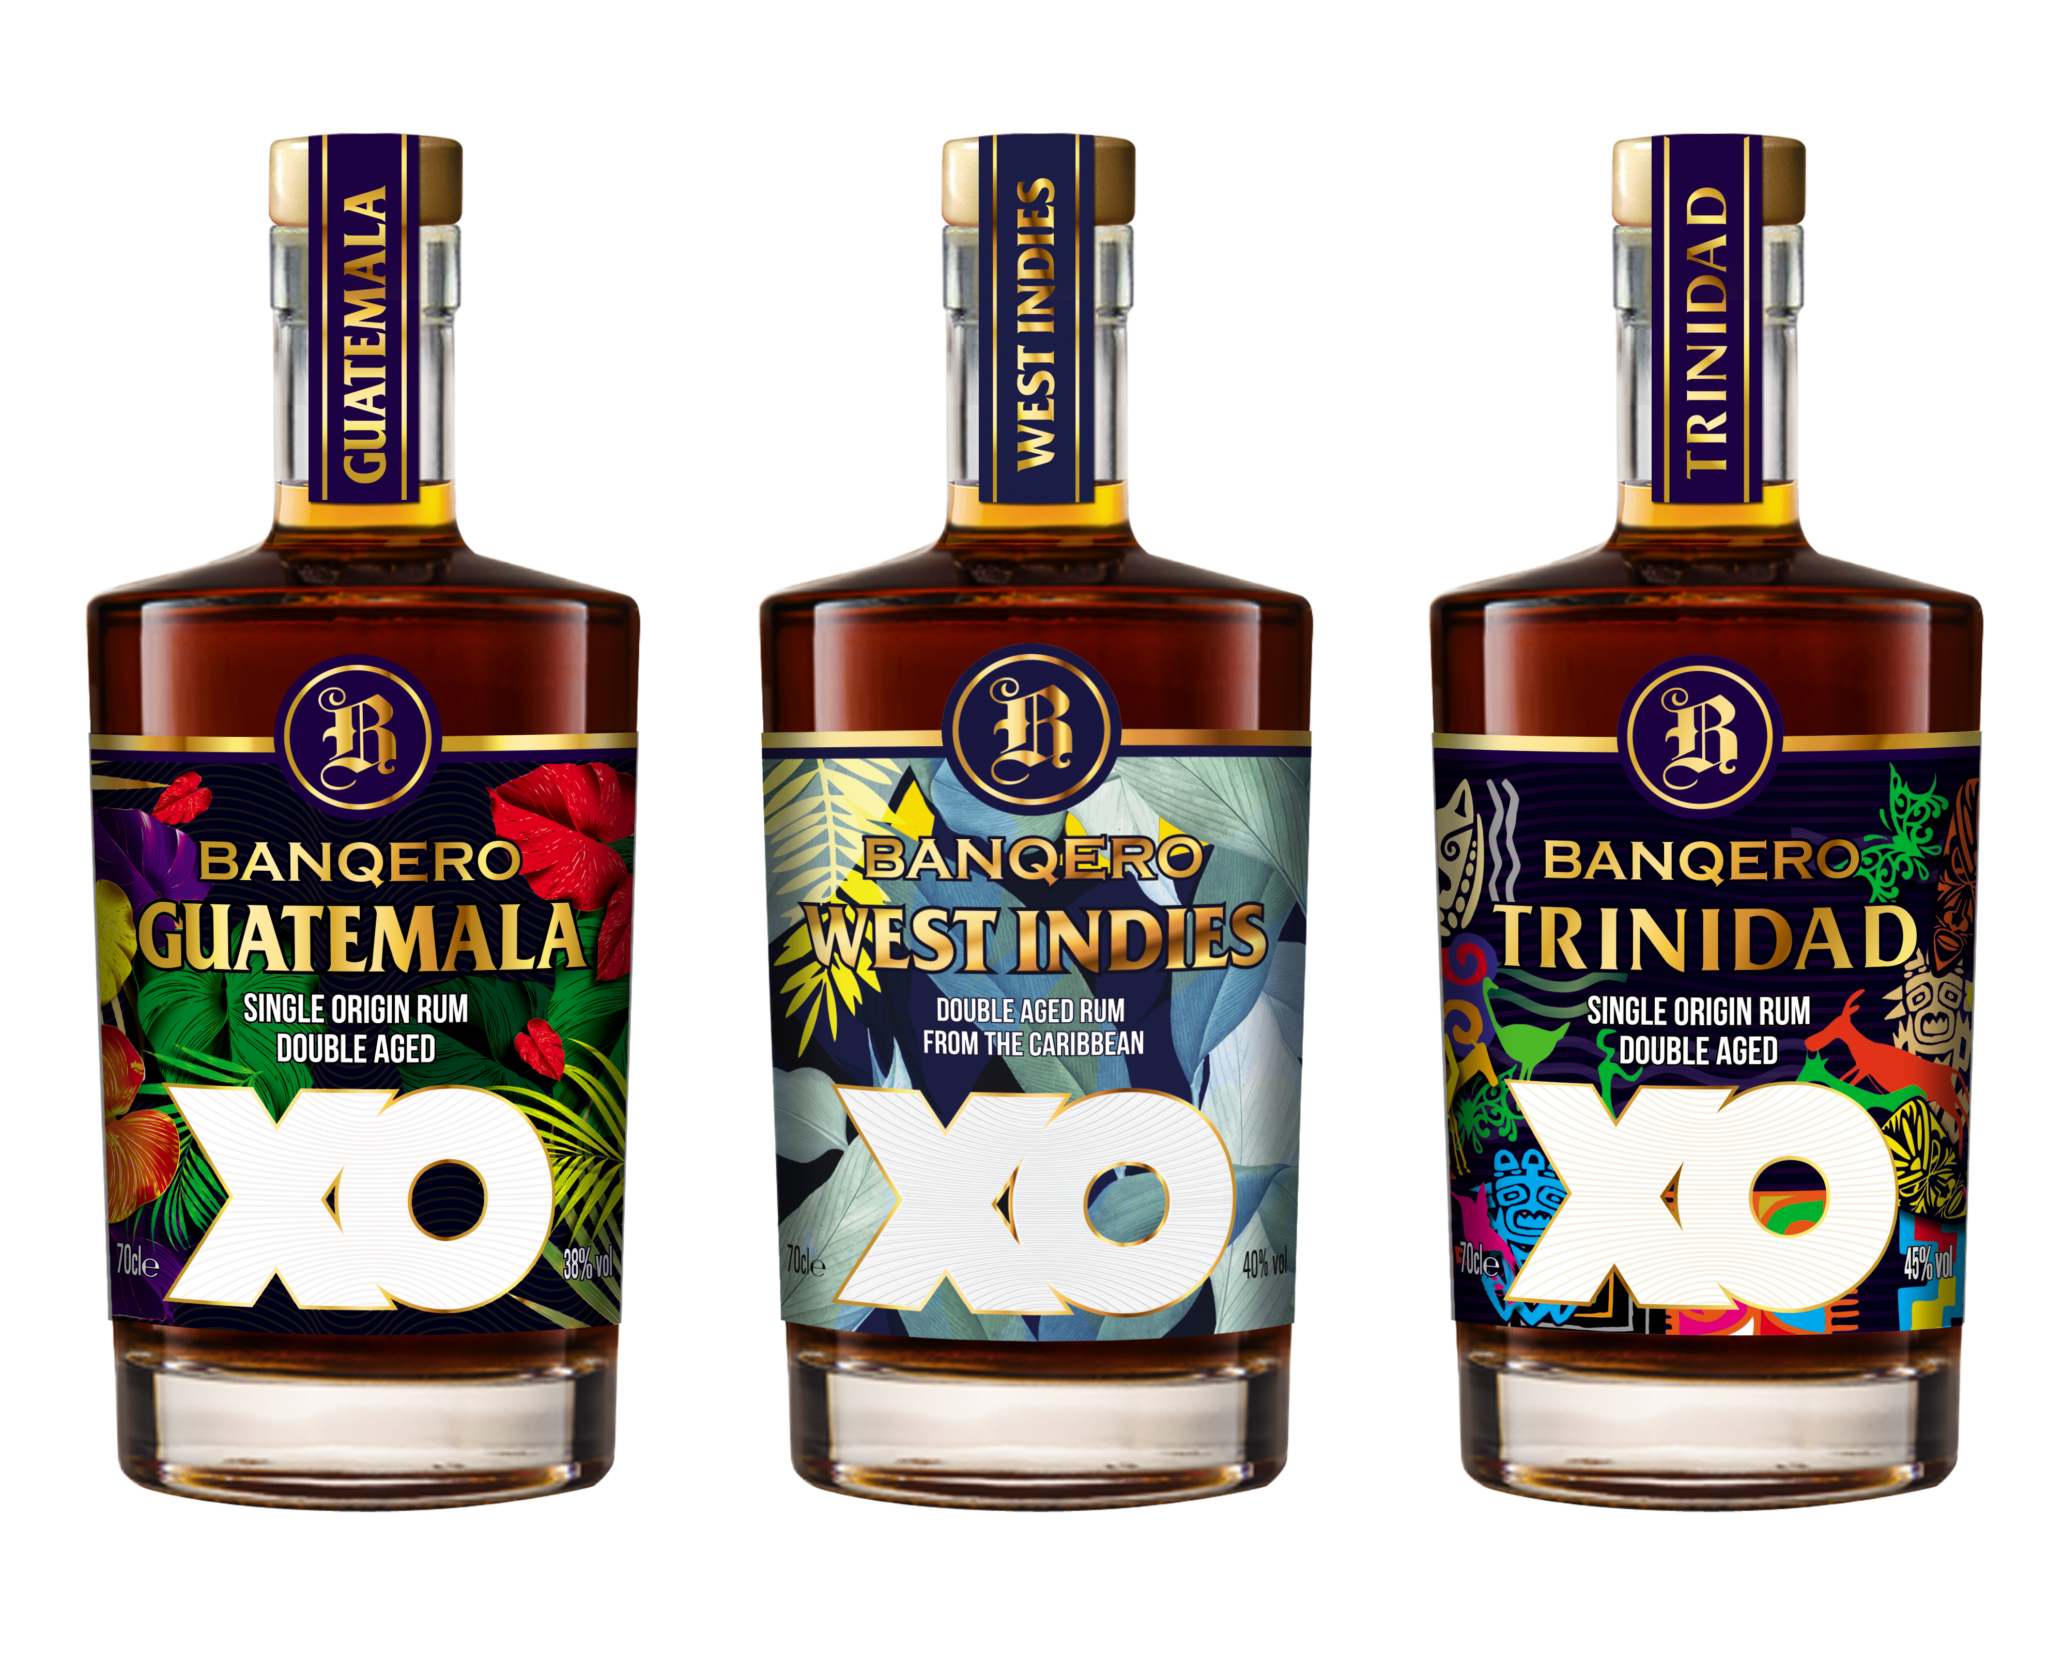 XO, VSOP, VO, vintage rums: we'll explain all the differences